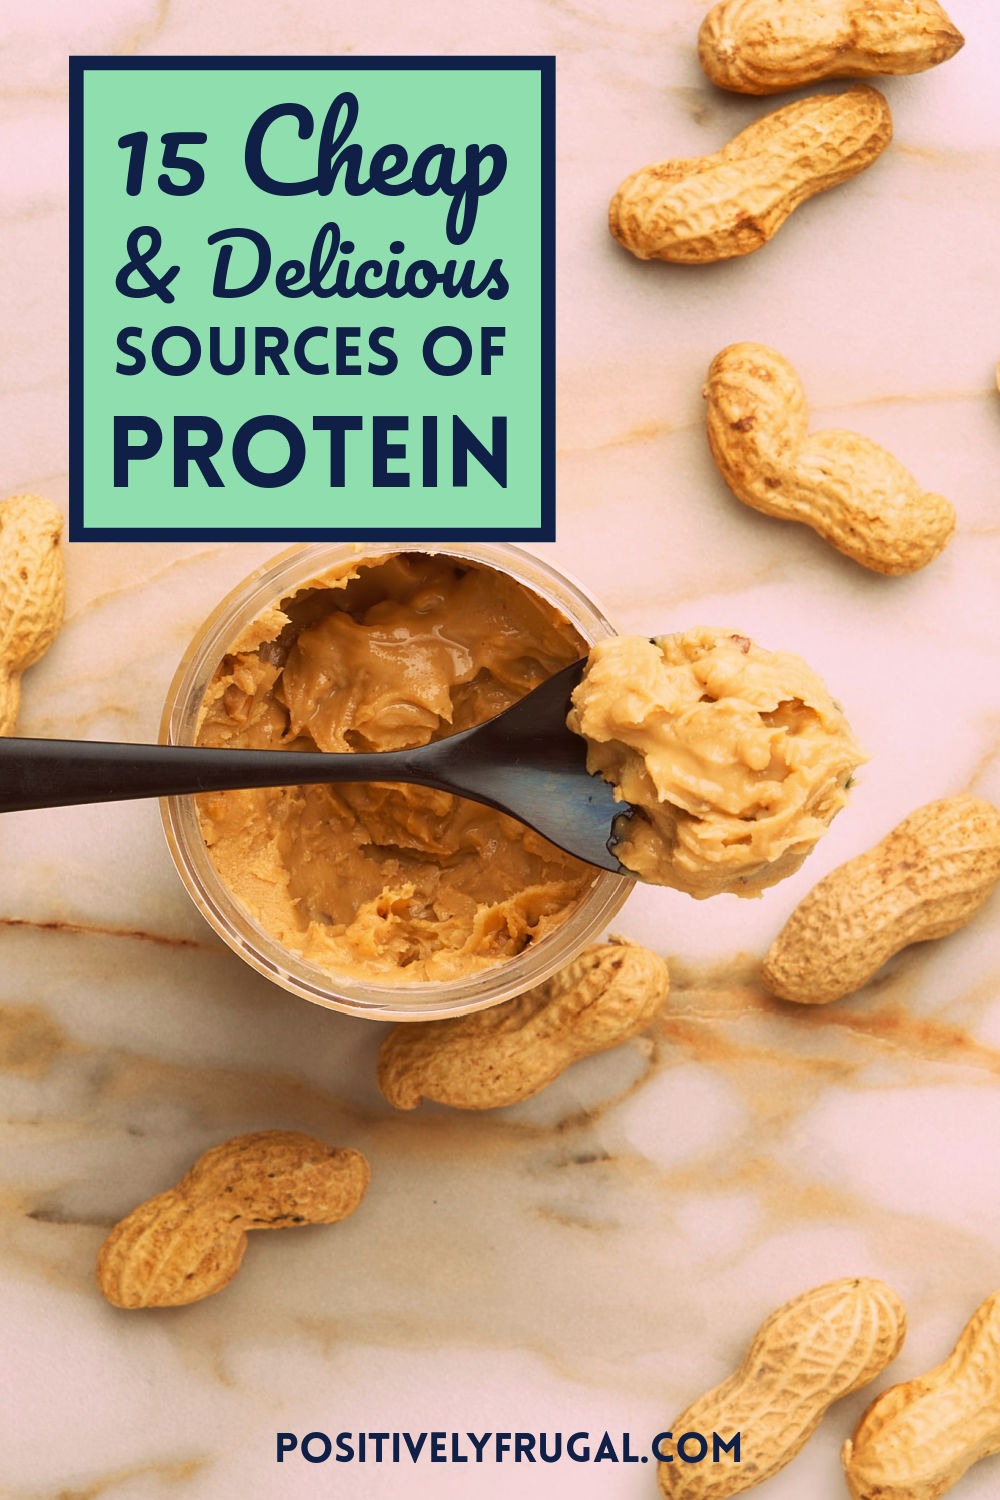 Cheap and Delicious Sources of Protein by PositivelyFrugal.com